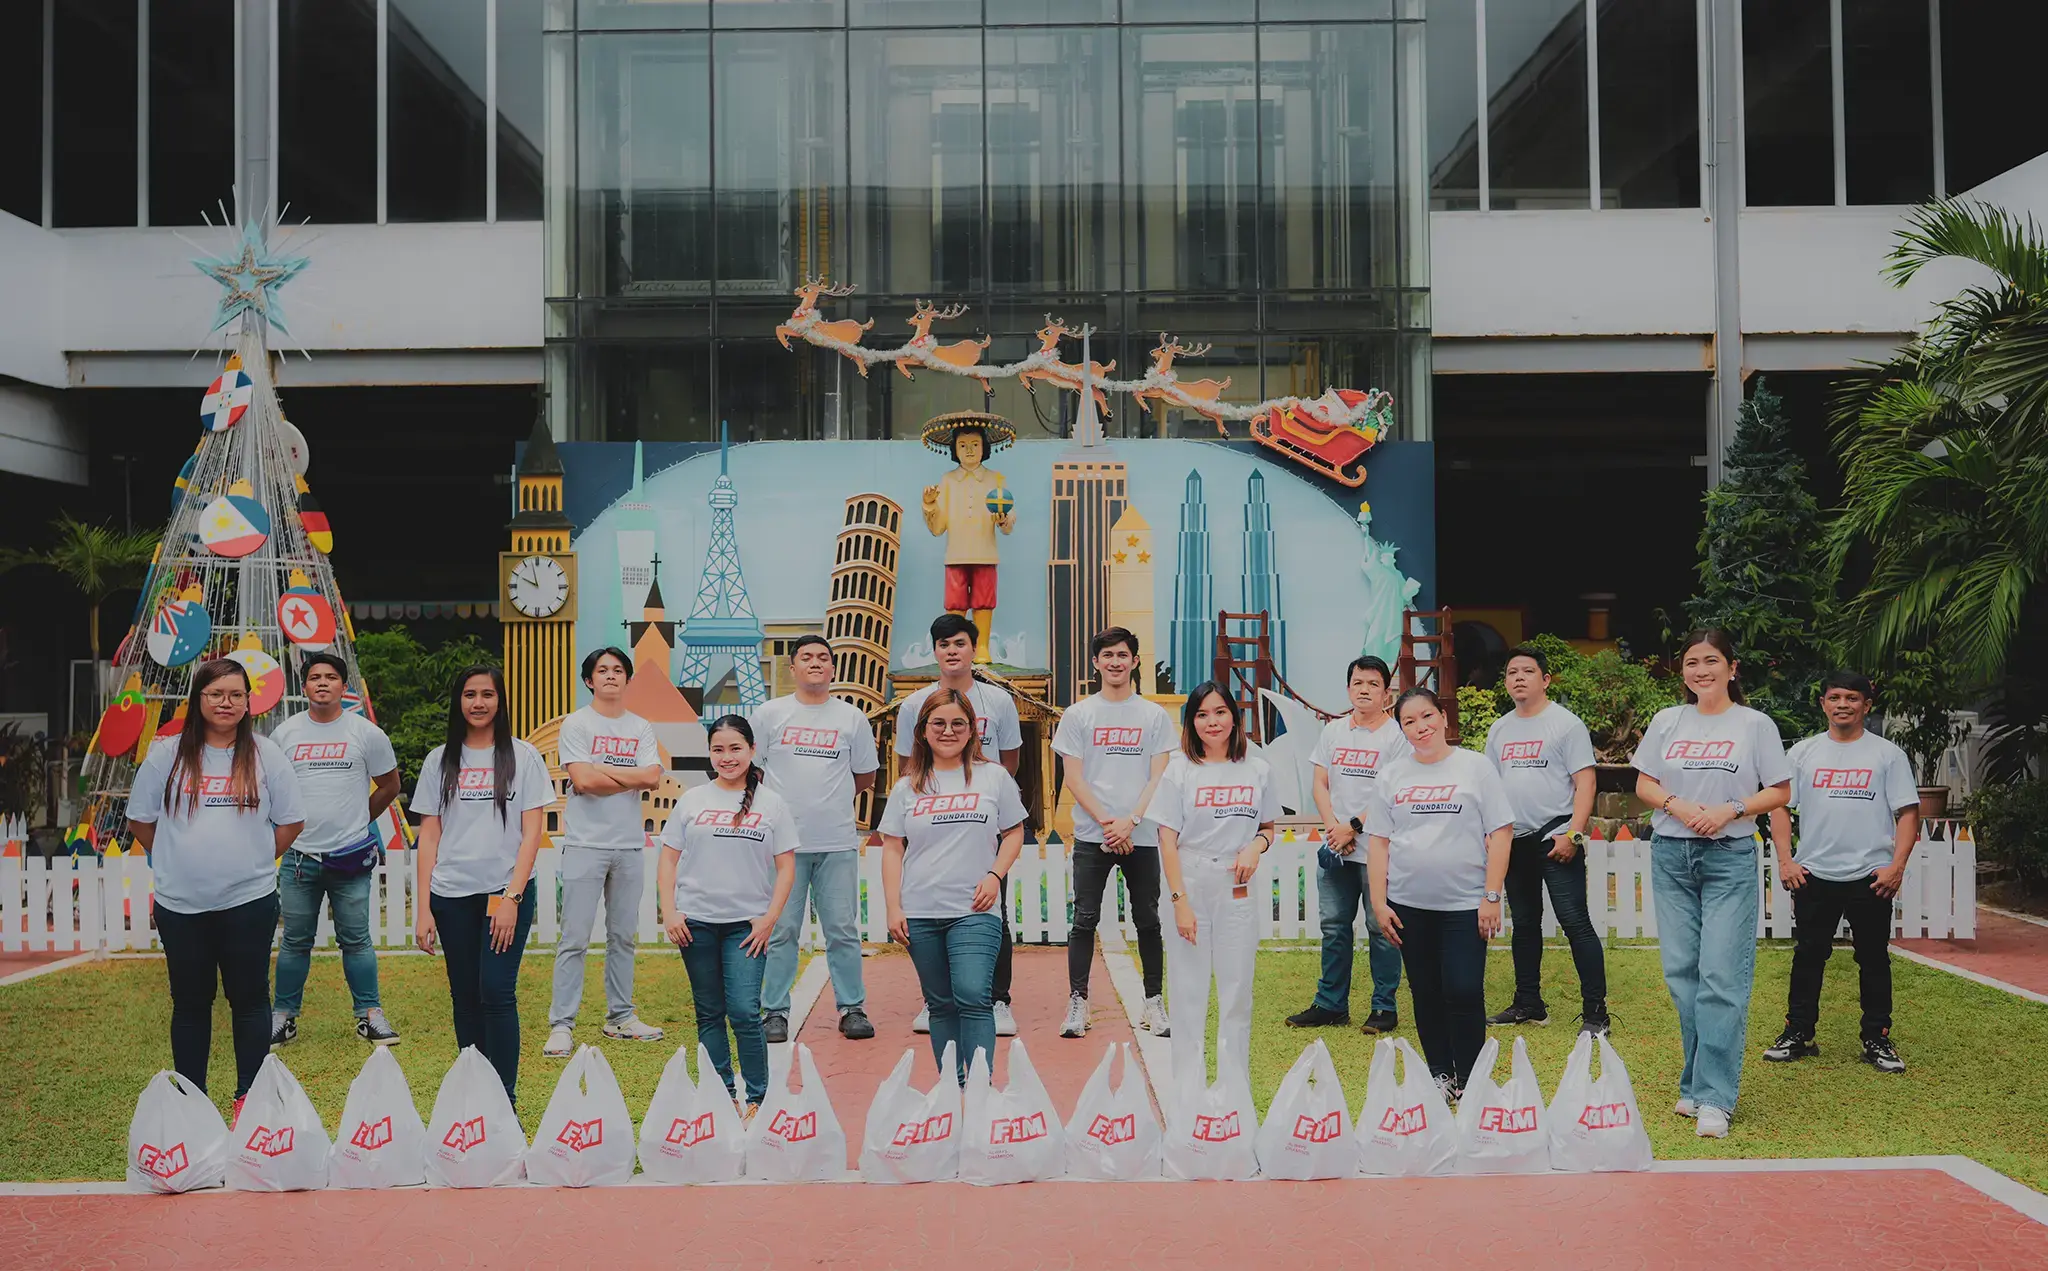 FBM Foundation volunteers posing for a photo with several goods donated in a solidarity action of the FBM group in the Philippines